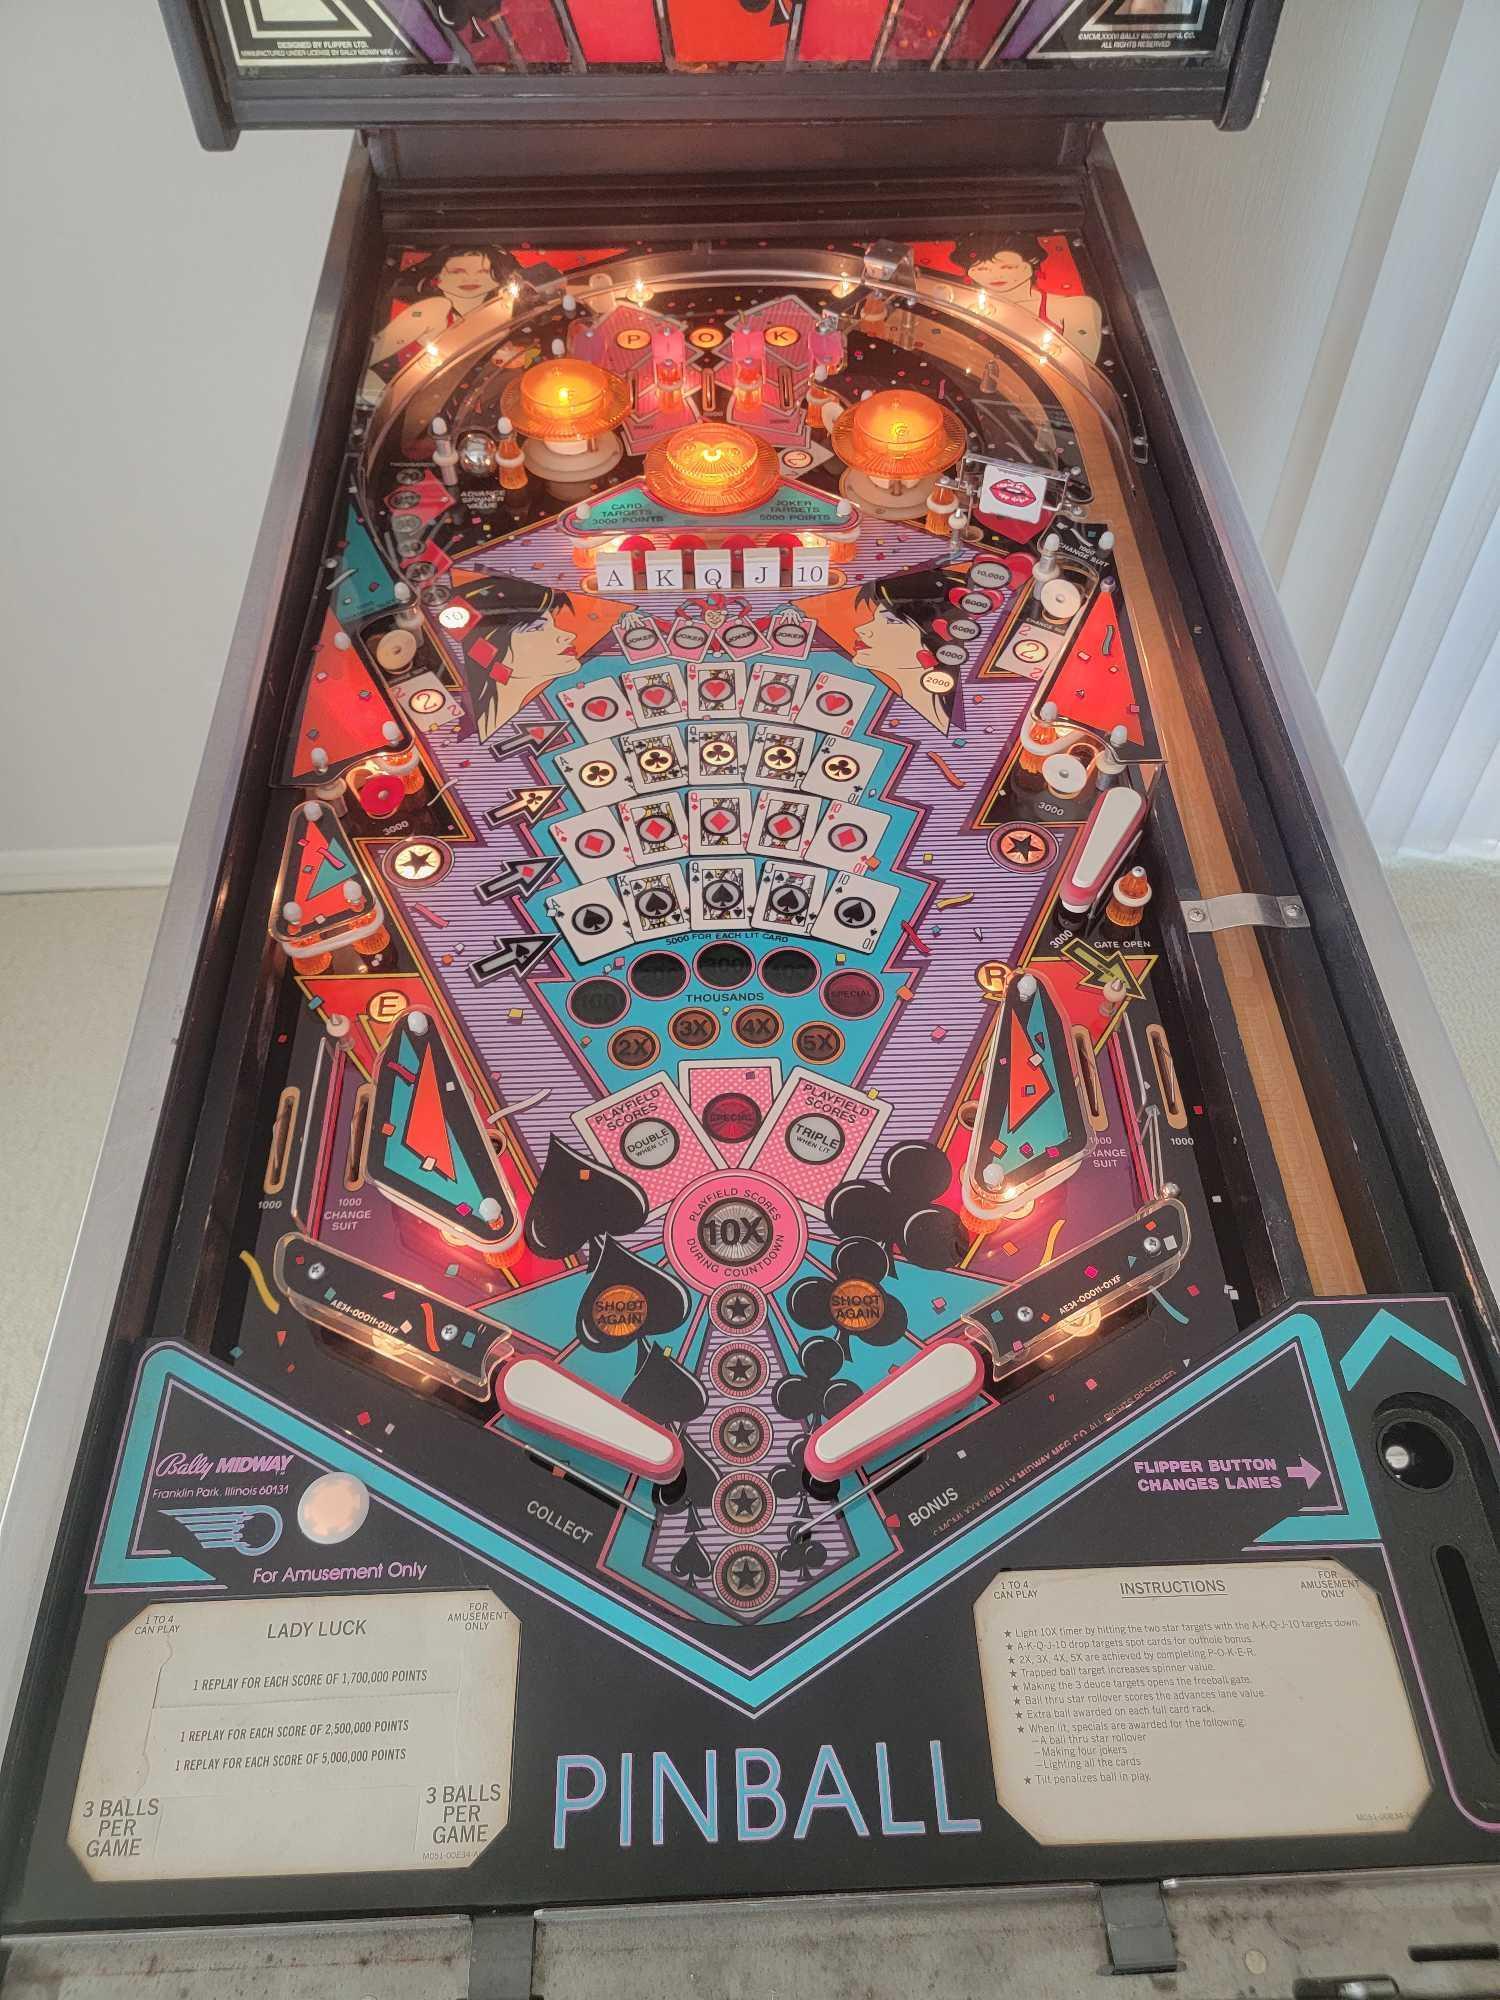 1986 Bally Midway Lady Luck Solid State Pinball Machine only 500 made